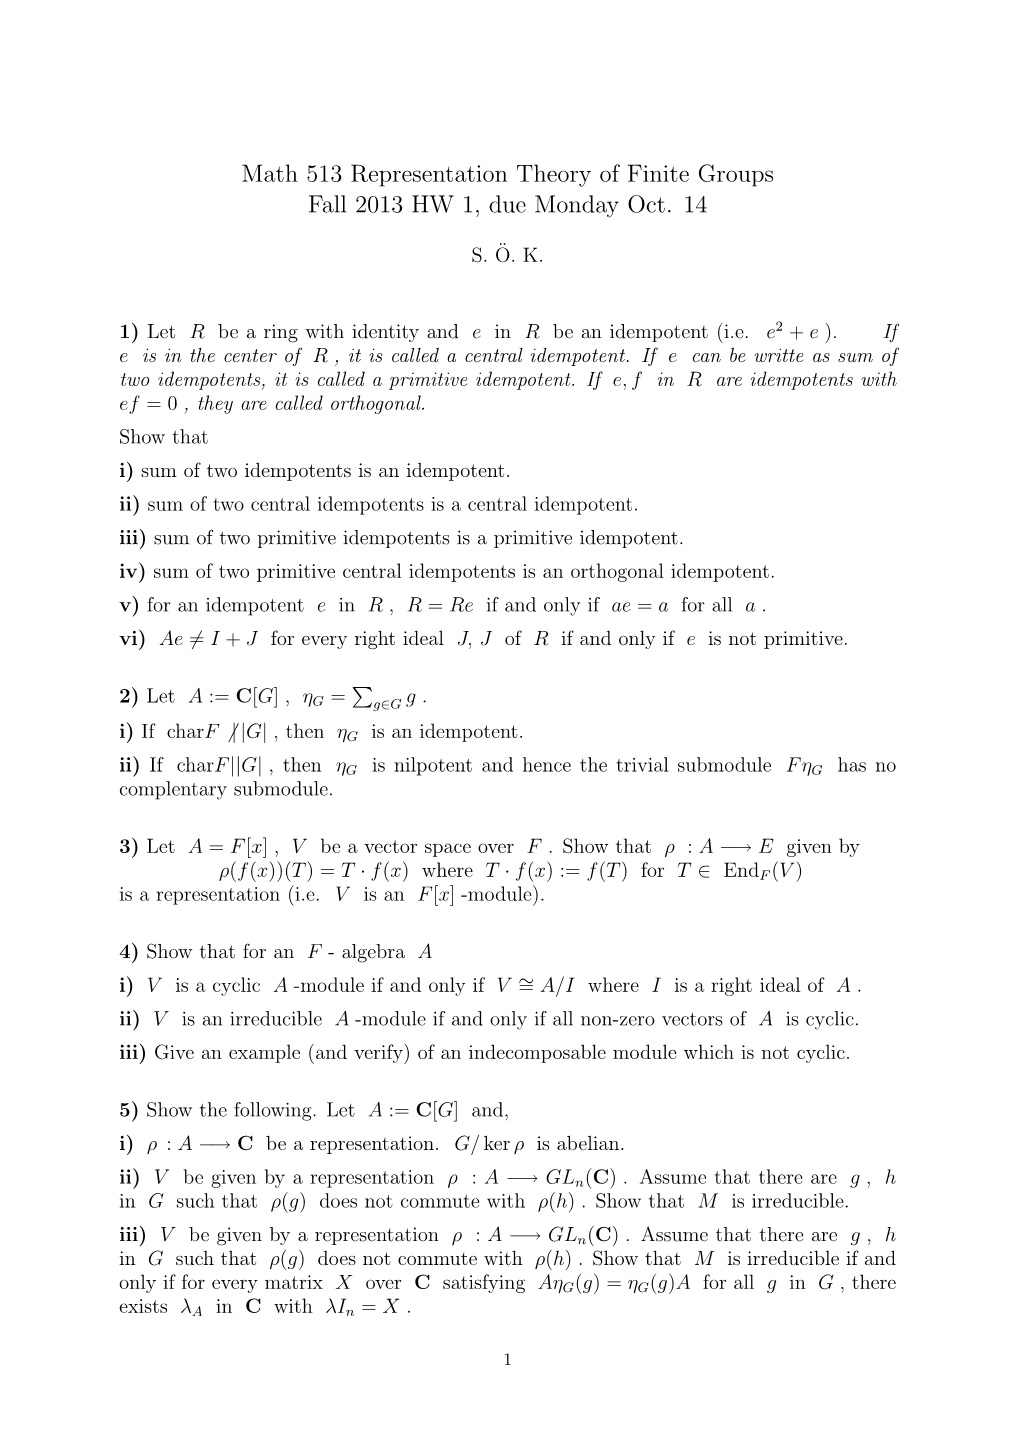 Math 513 Representation Theory of Finite Groups Fall 2013 HW 1, Due Monday Oct